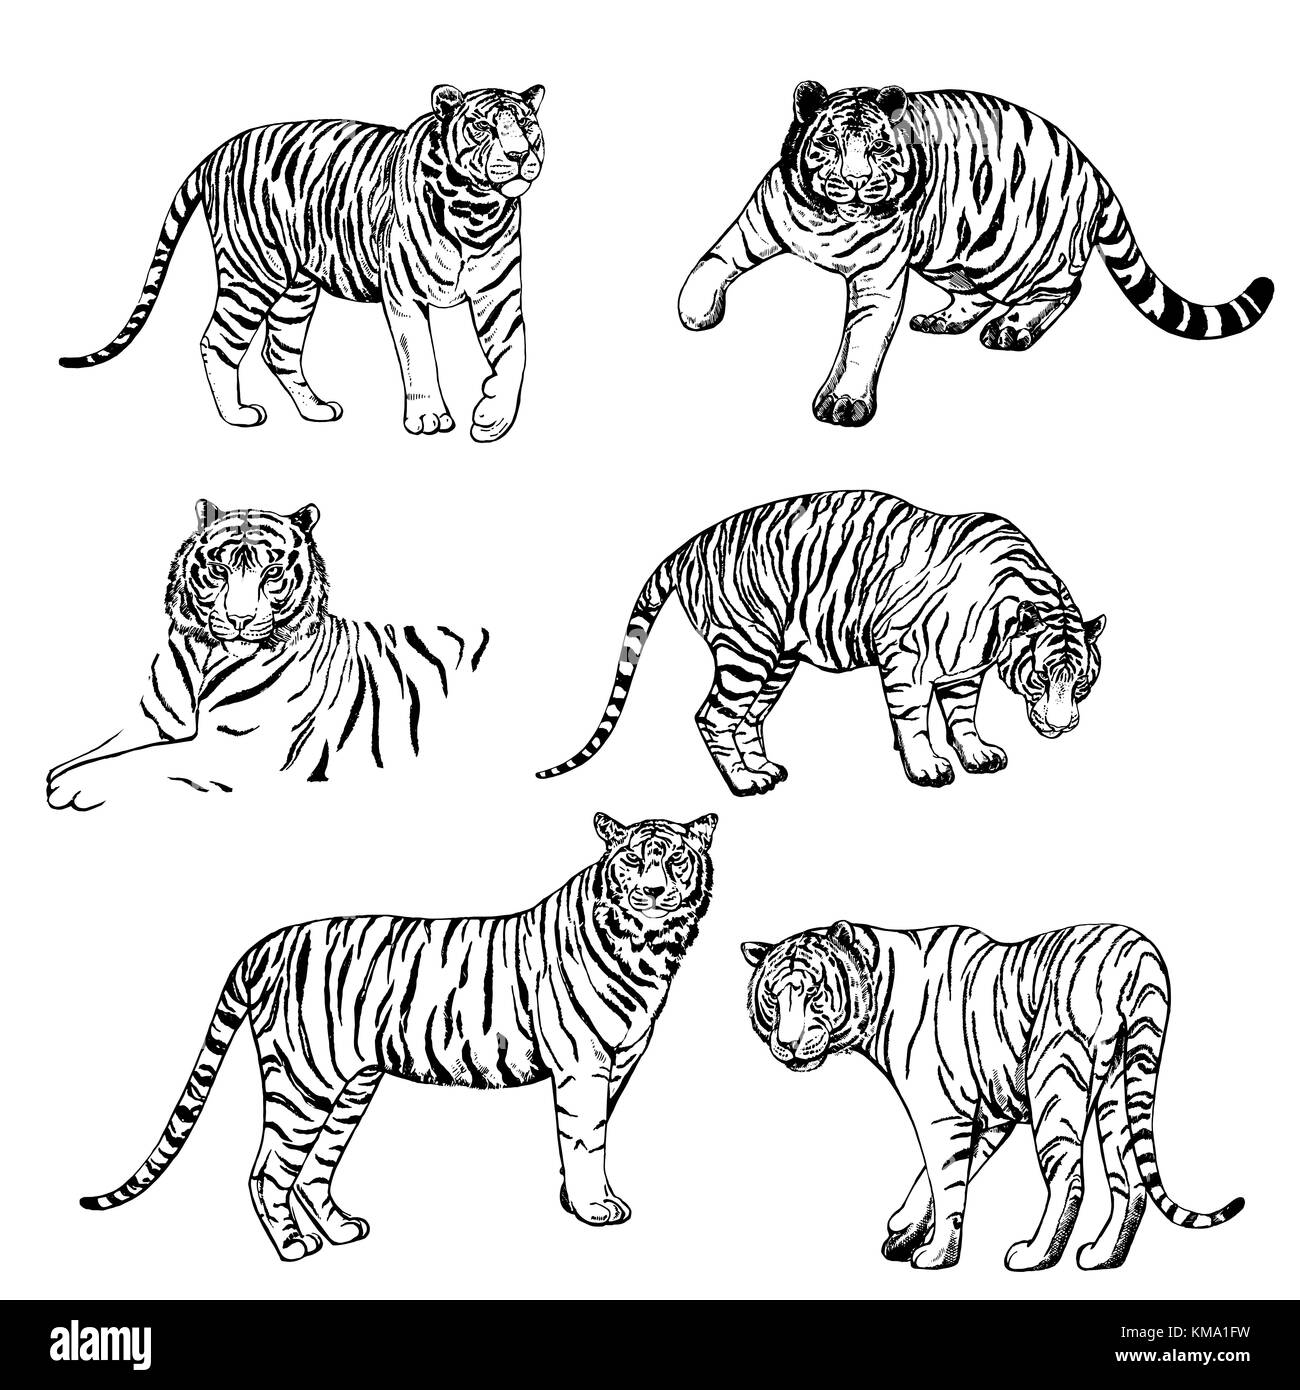 Hand drawn sketch style tigers. Vector illustration isolated on white ...